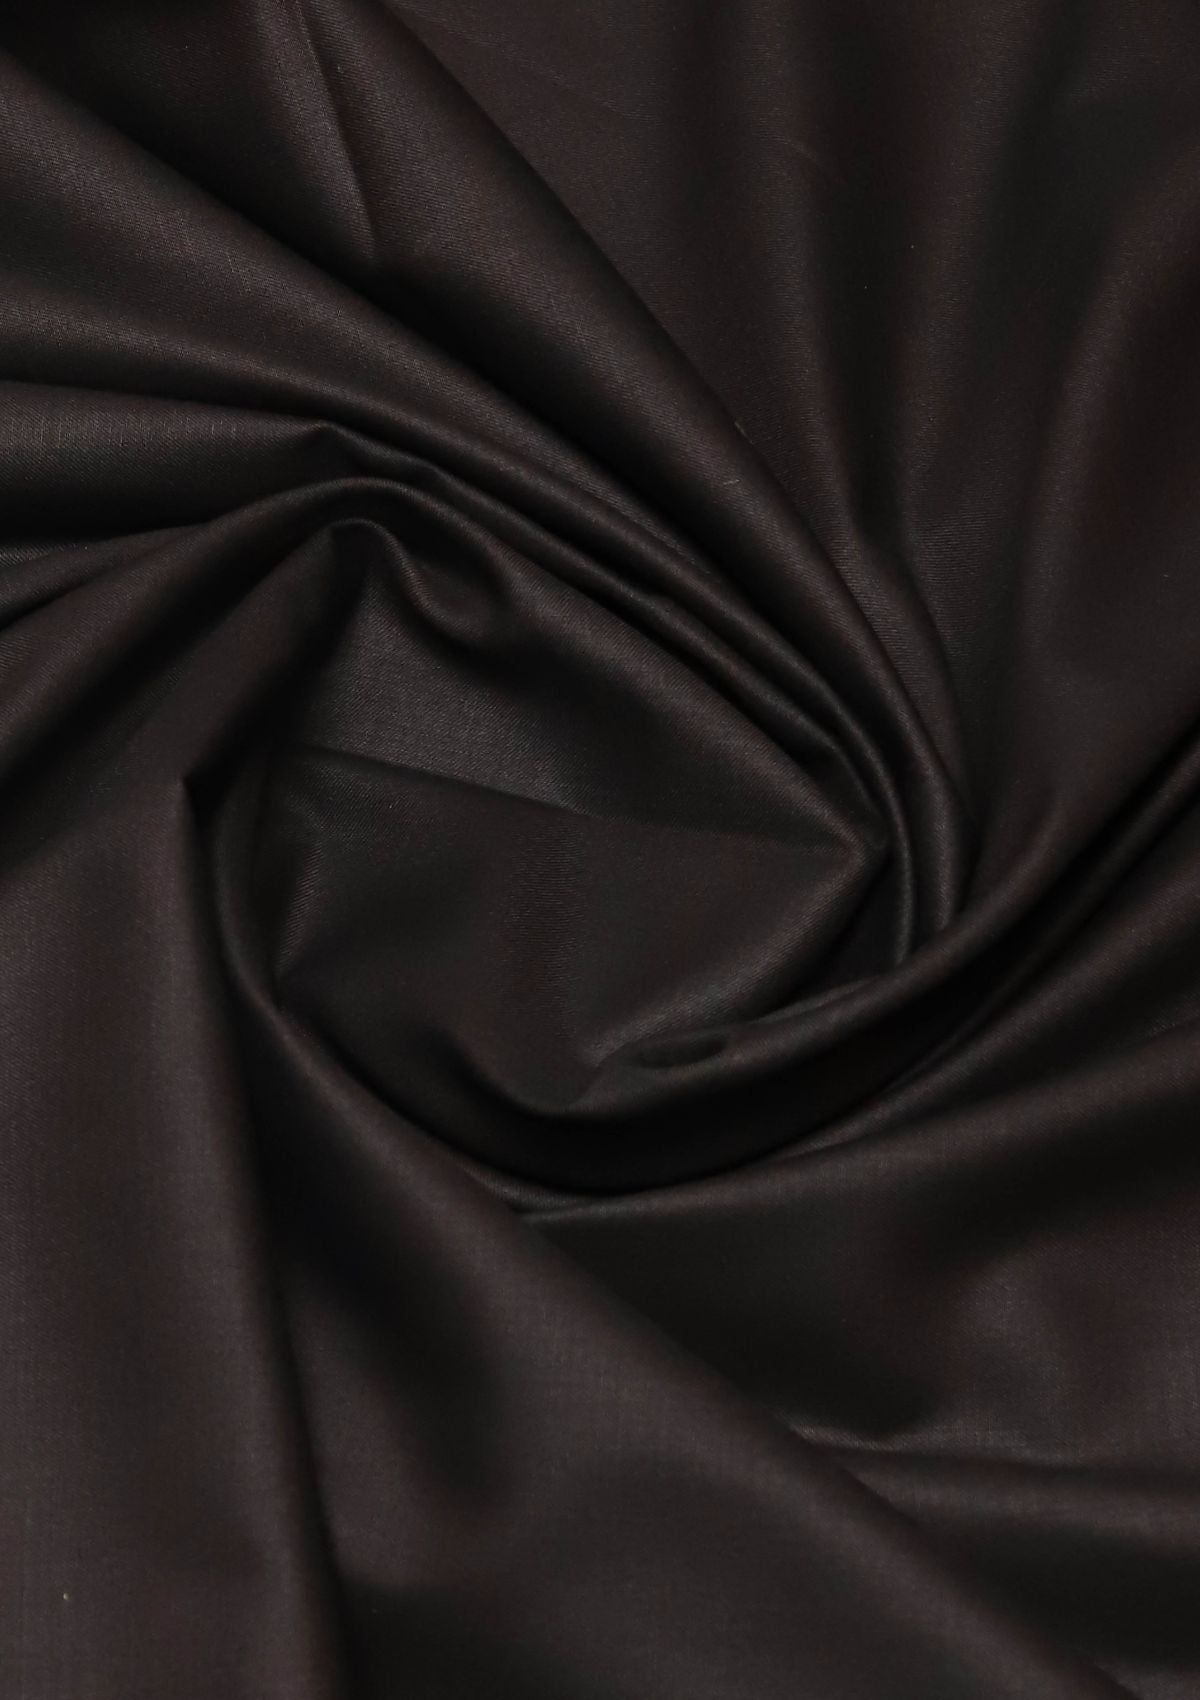 Winter Imported Shalwar Kameez Color# (Chocolate) available at Saleem Fabrics Traditions